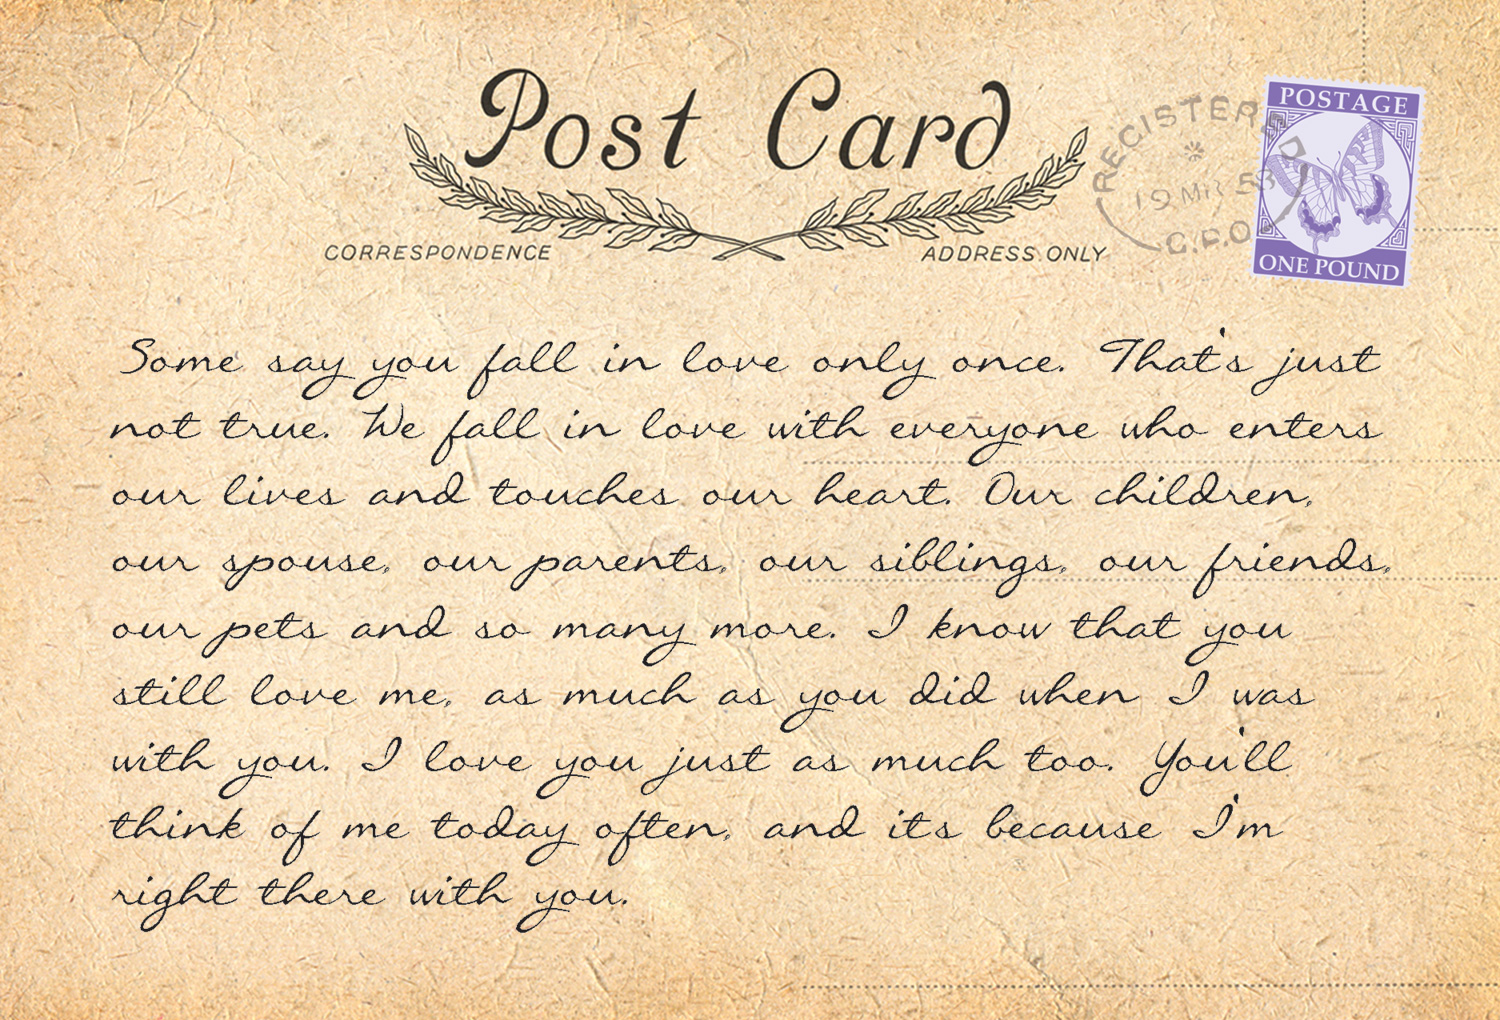 POSTCARDS FROM HEAVEN 2 - back 13